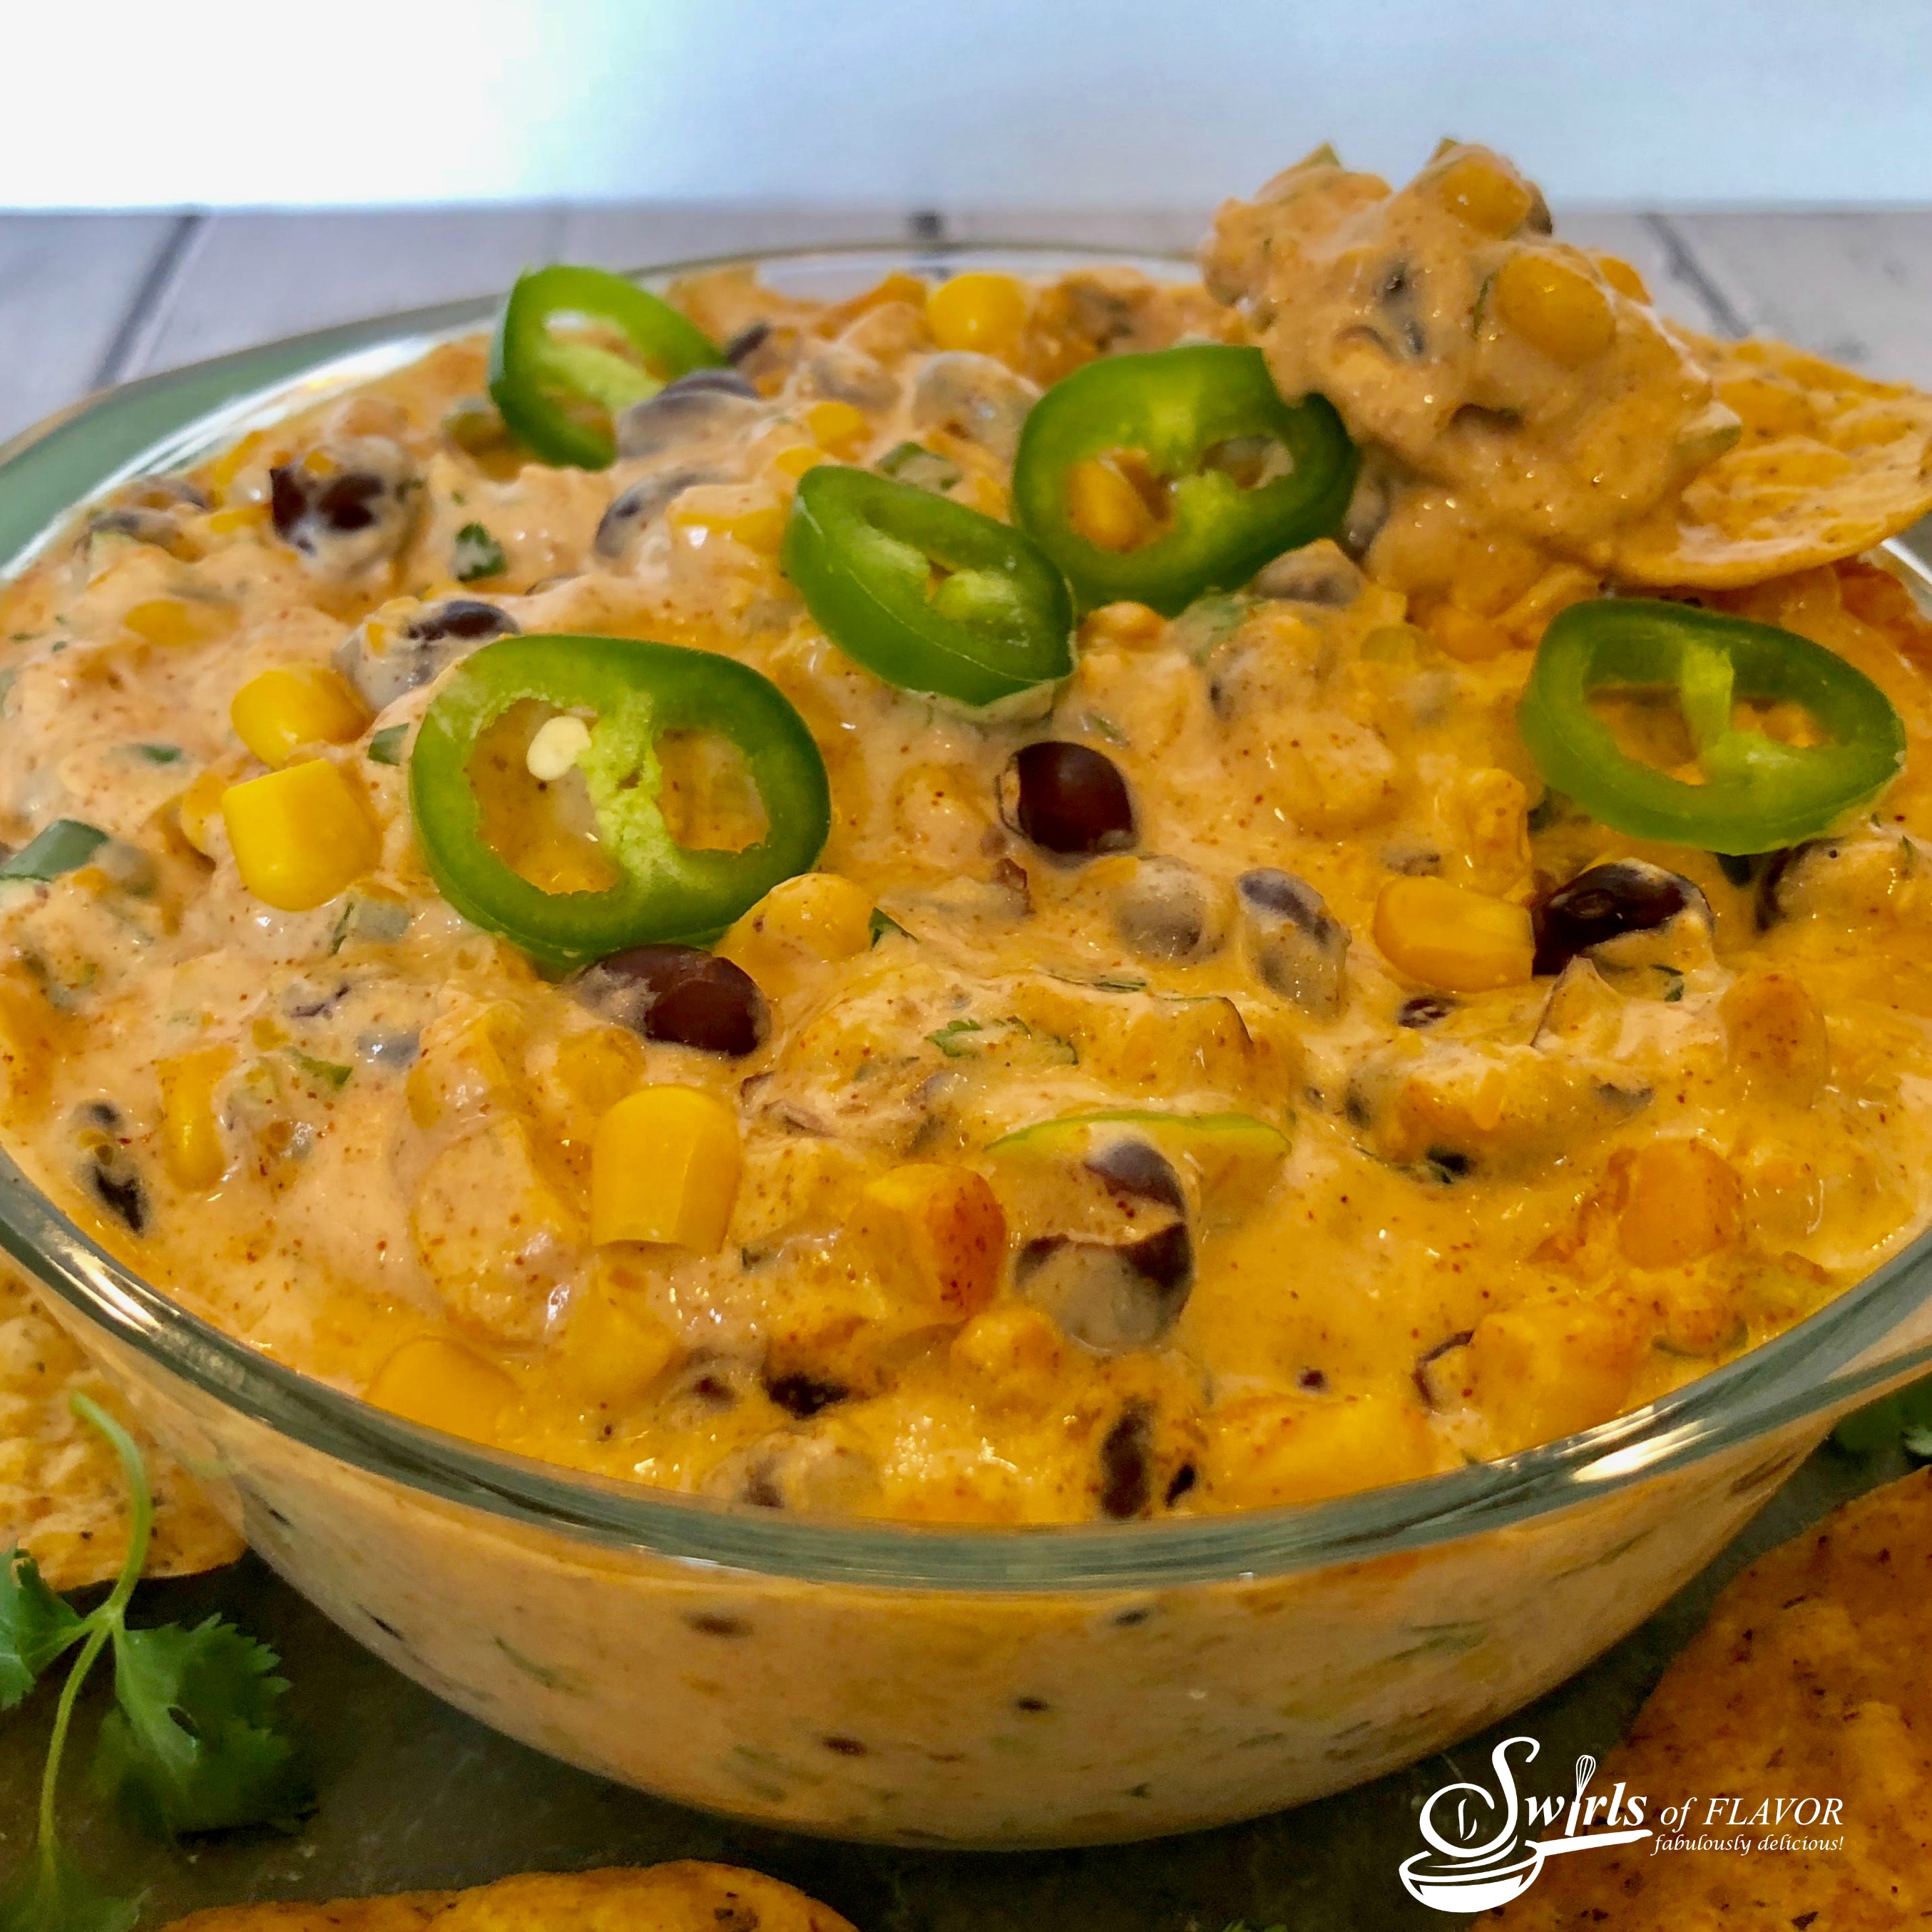 corn and black bean dip in a bowl with jalapeno slices